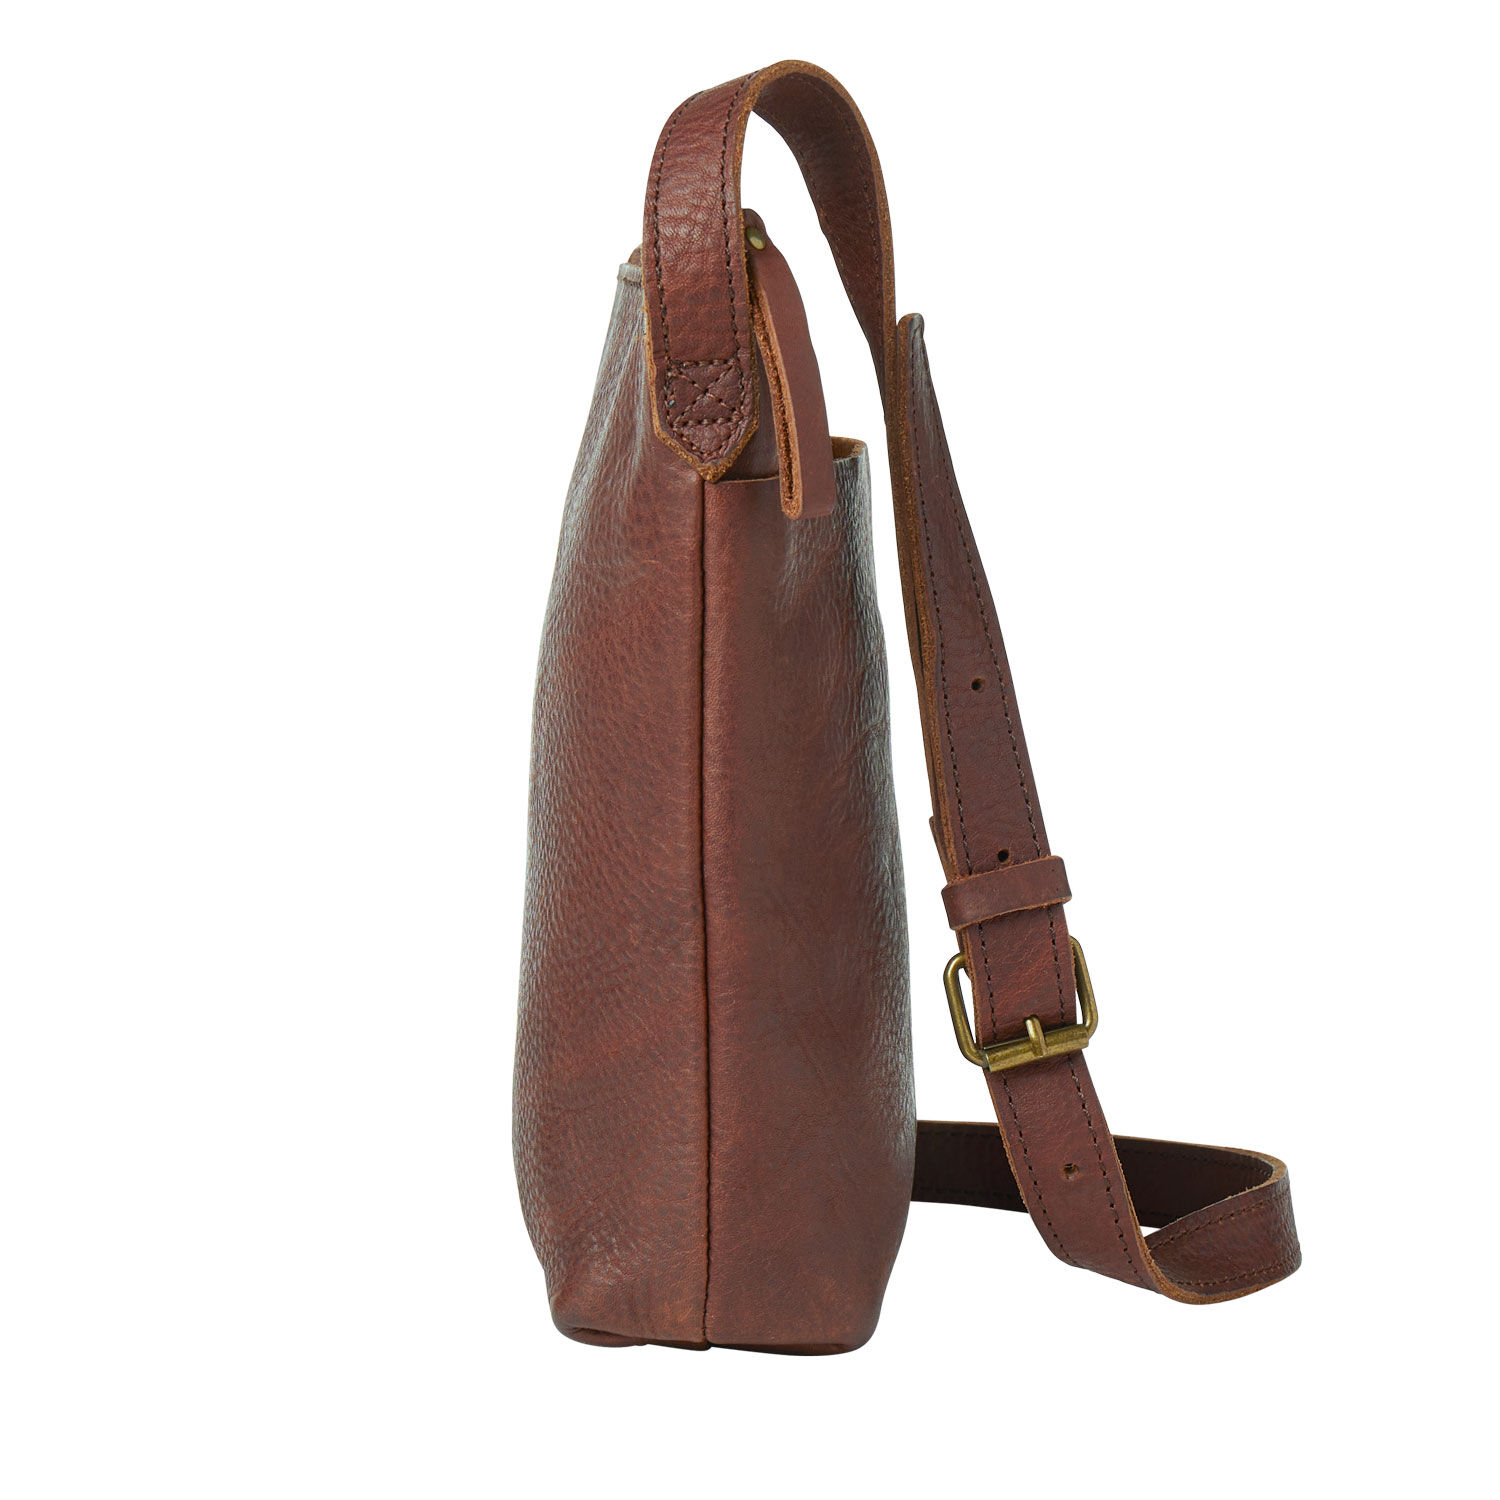 Premium Moulded iPad leather Sling Bag Online in India @ TLB – TLB - The  Leather Boutique